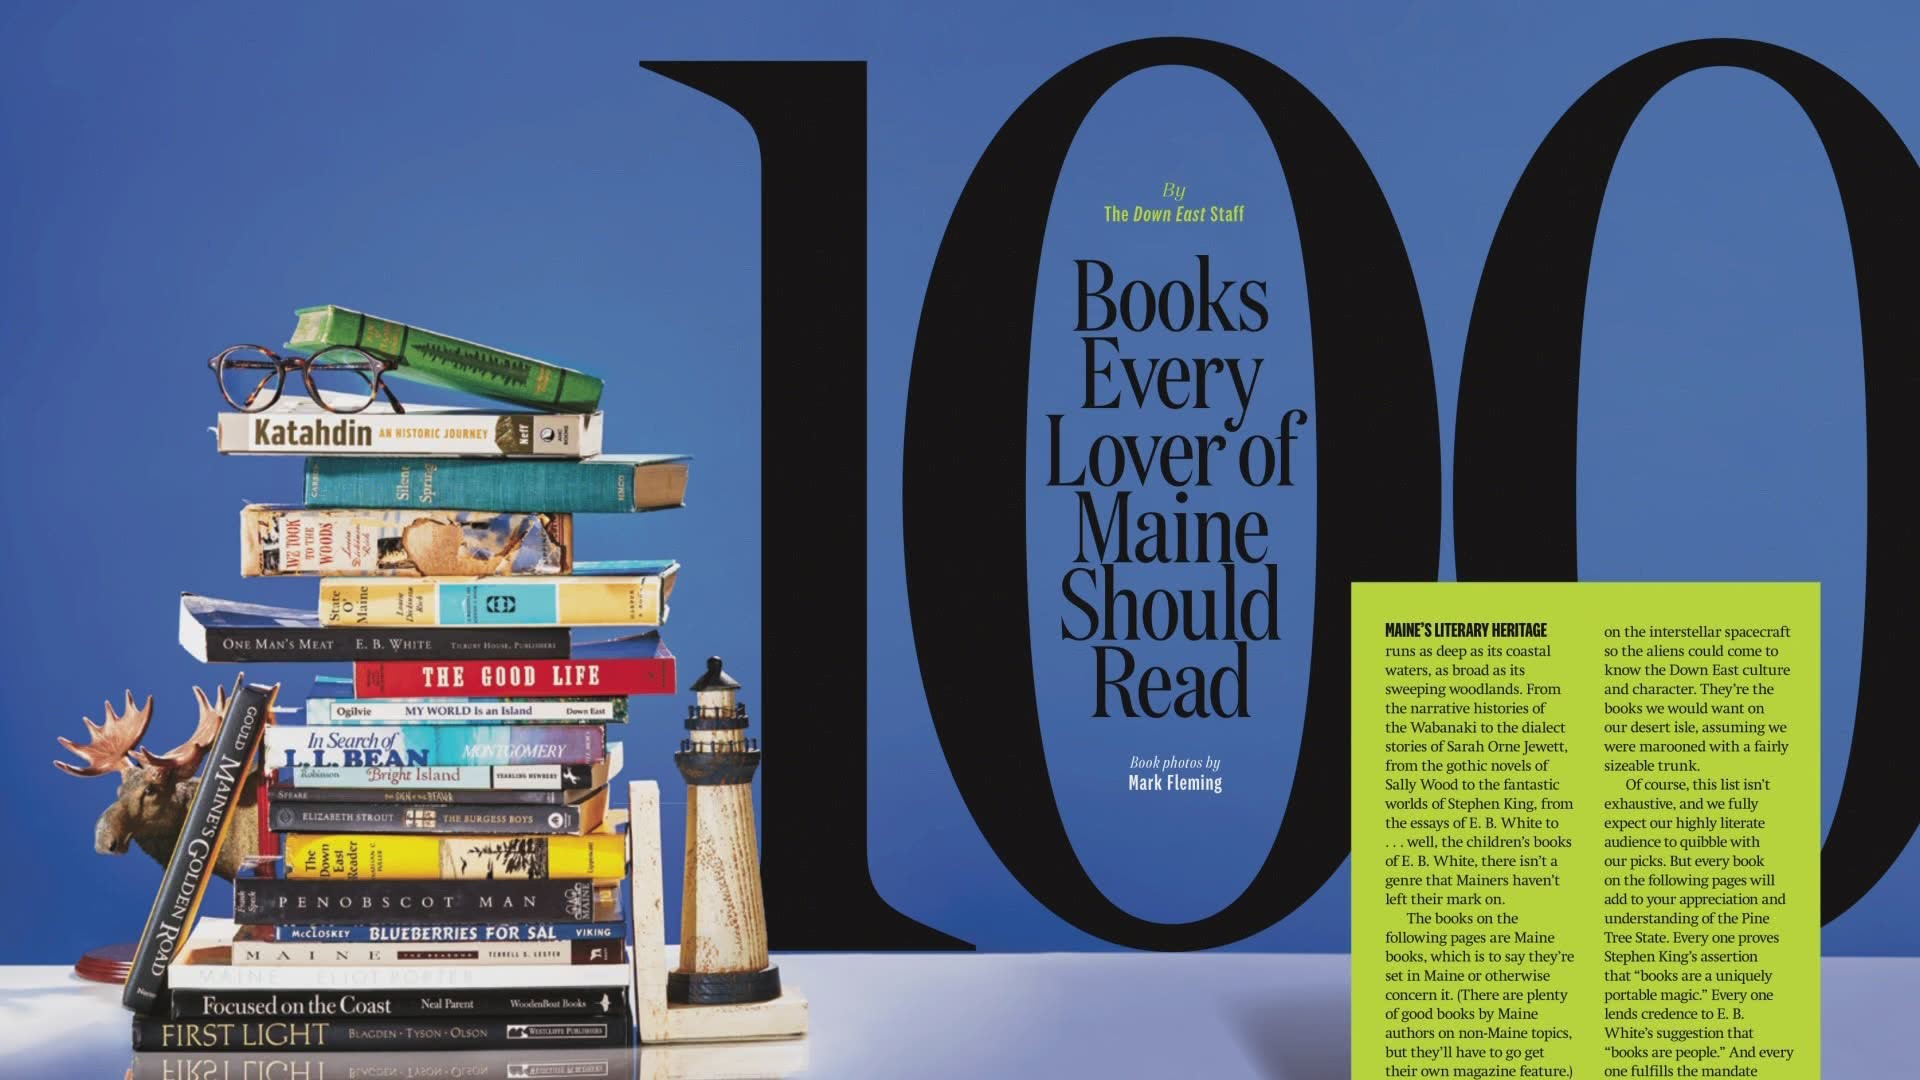 The latest issue looks at 100 books Mainers should read.